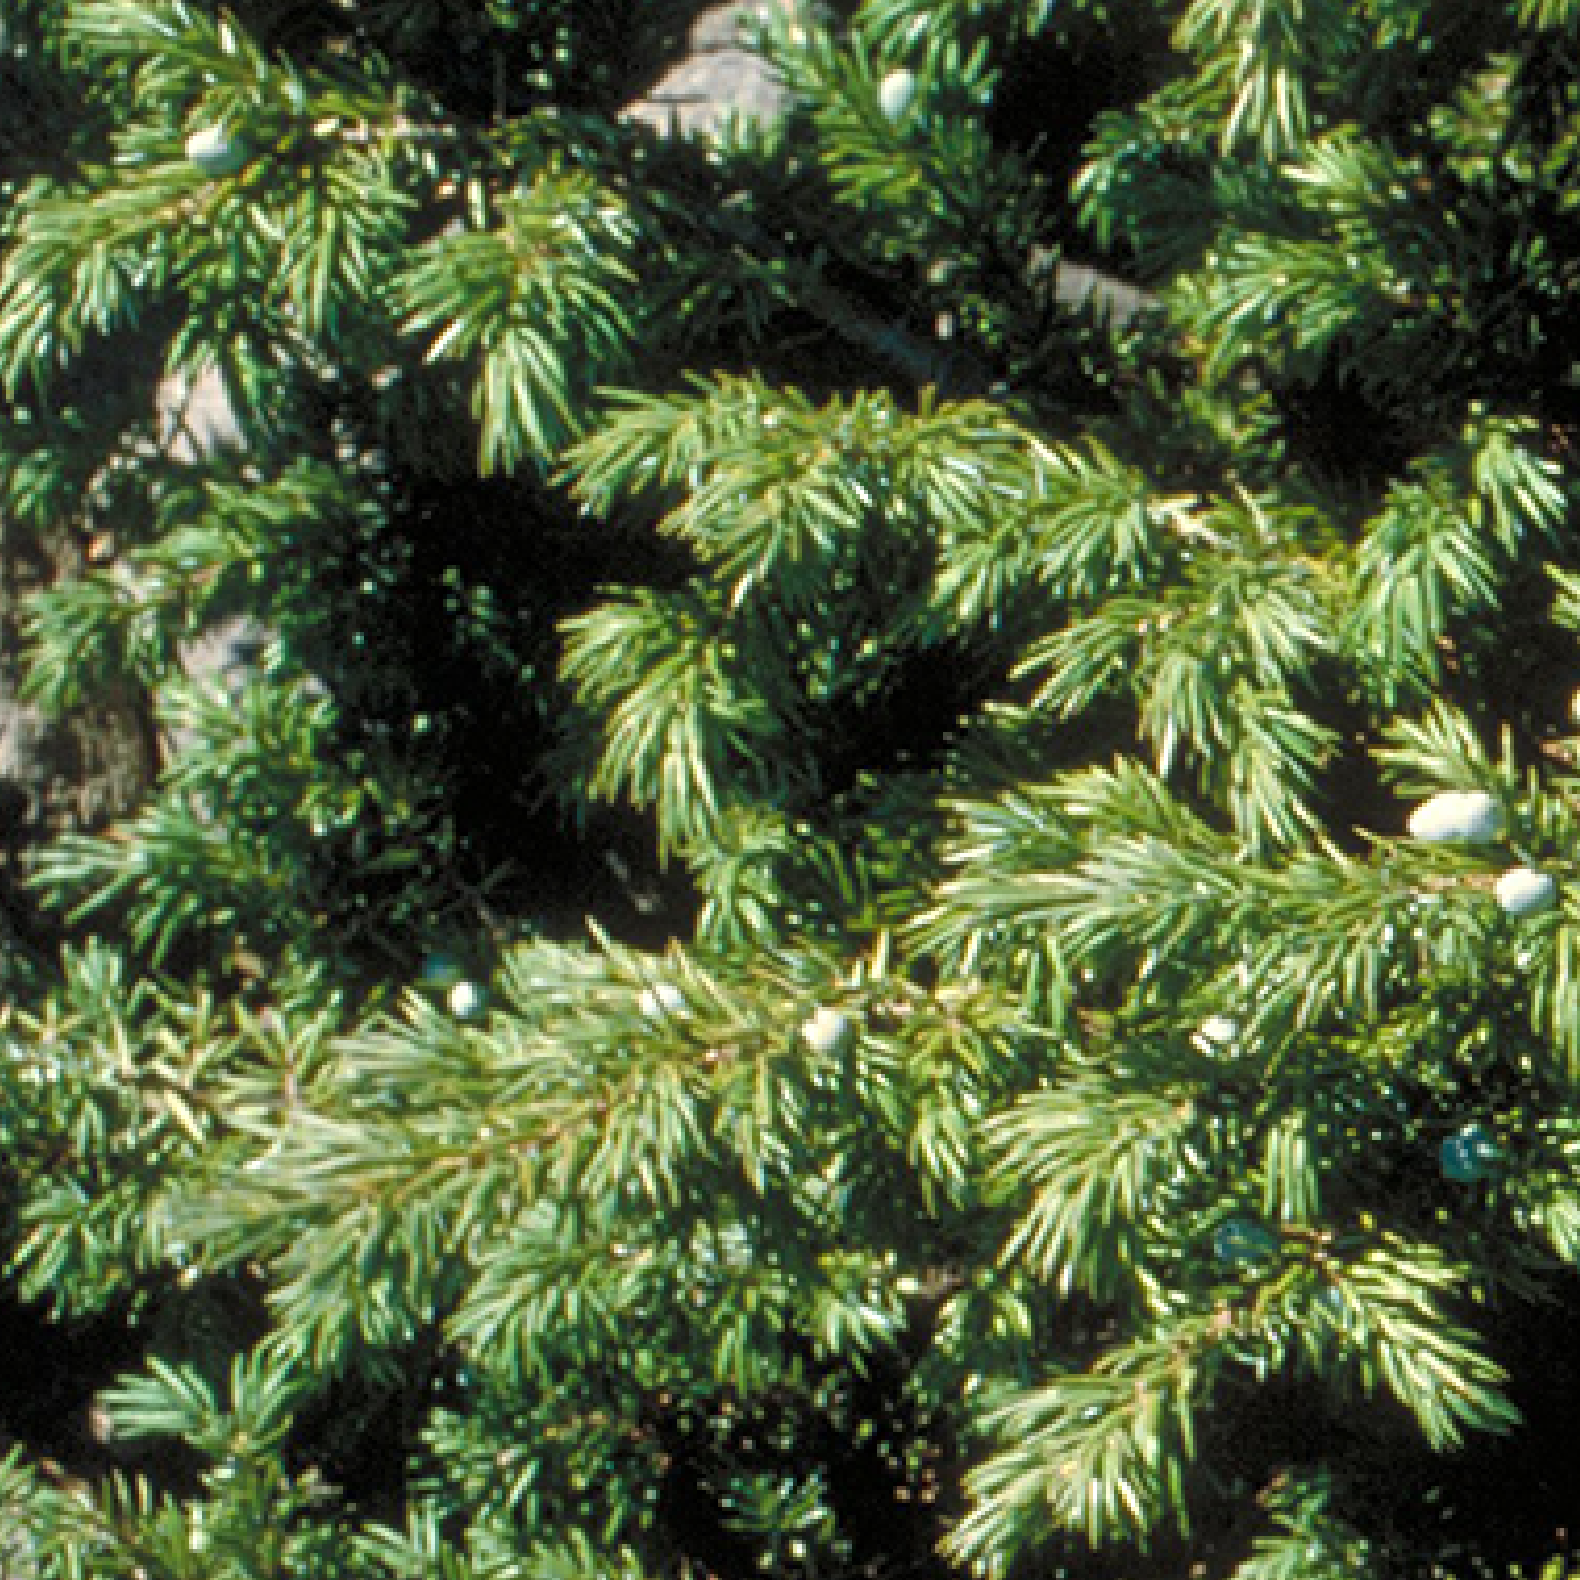 A close up of a common juniper and it's needles.  It is a thick shrubby plant with small sharp needles.